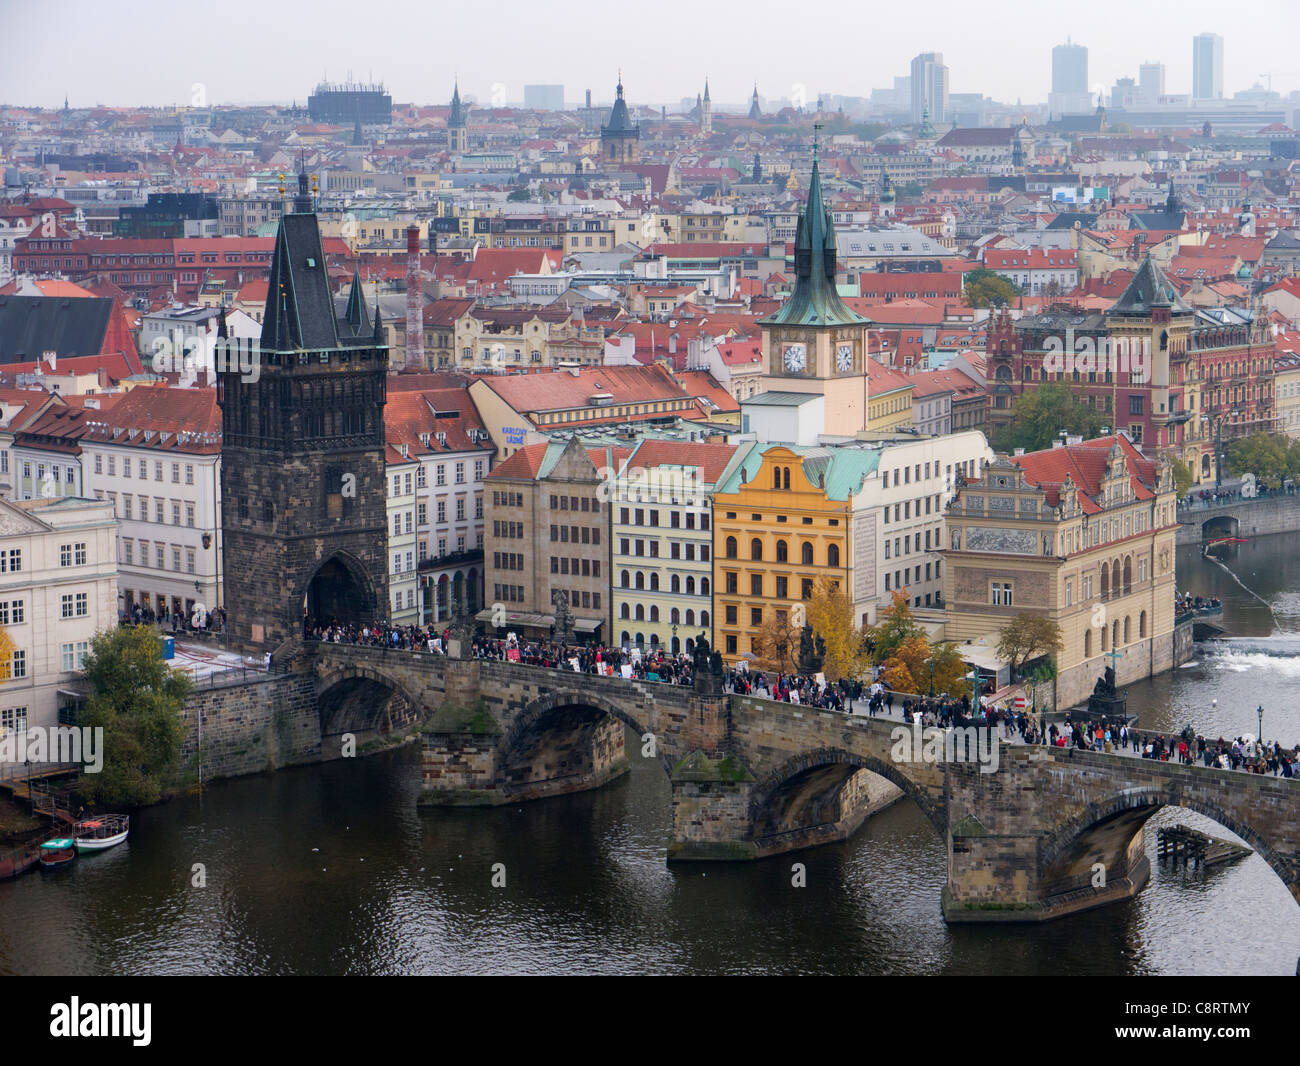 Ariel view of Charles Bridge or Karluv Most in Prague in Czech Republic Stock Photo